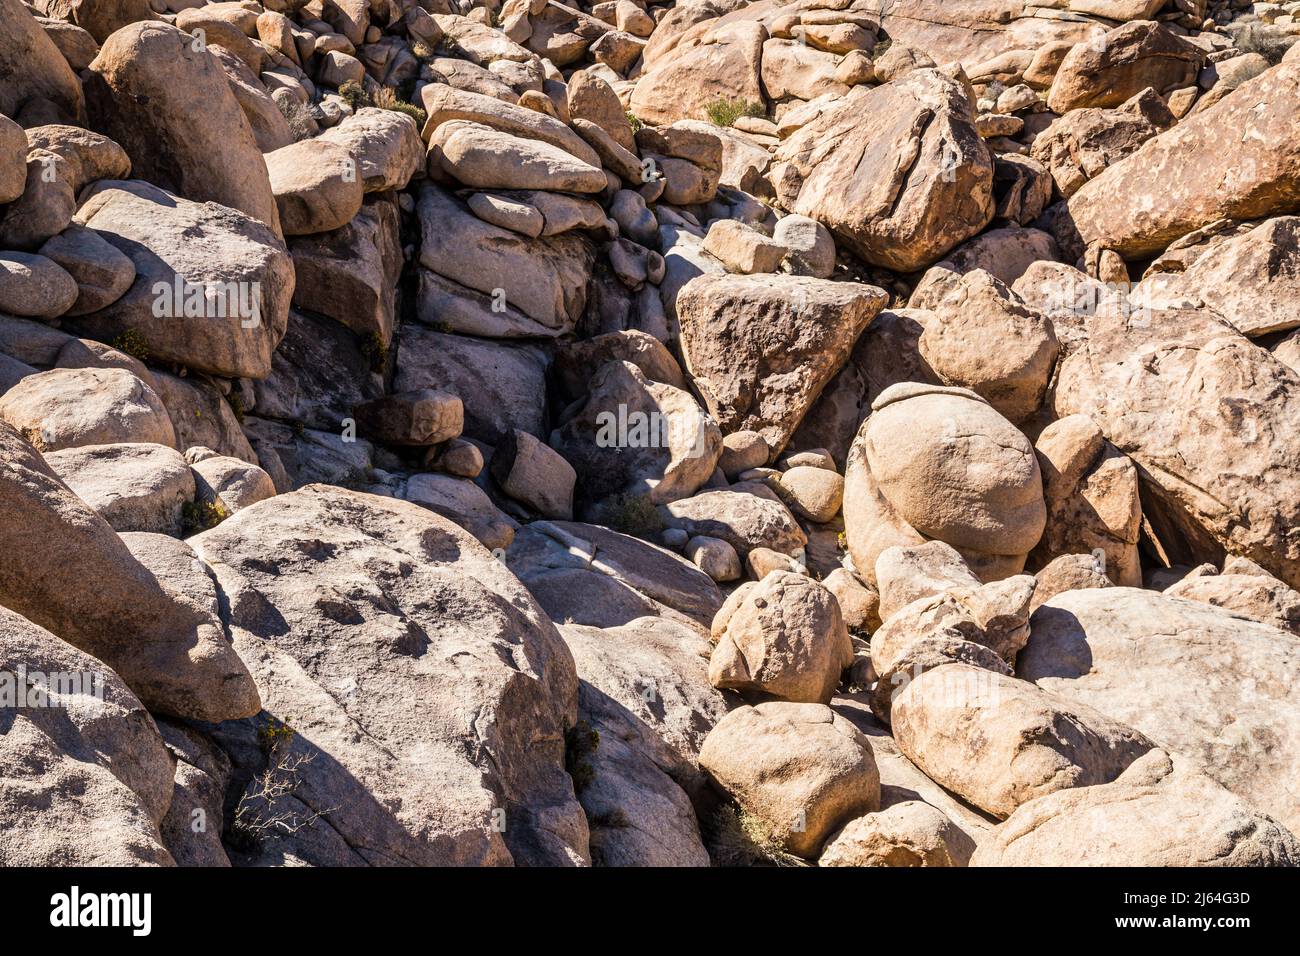 Large boulders and rock formations in a canyon near Indian Cove and Rattlesnake Day use area, Joshua Tree National Park. Stock Photo